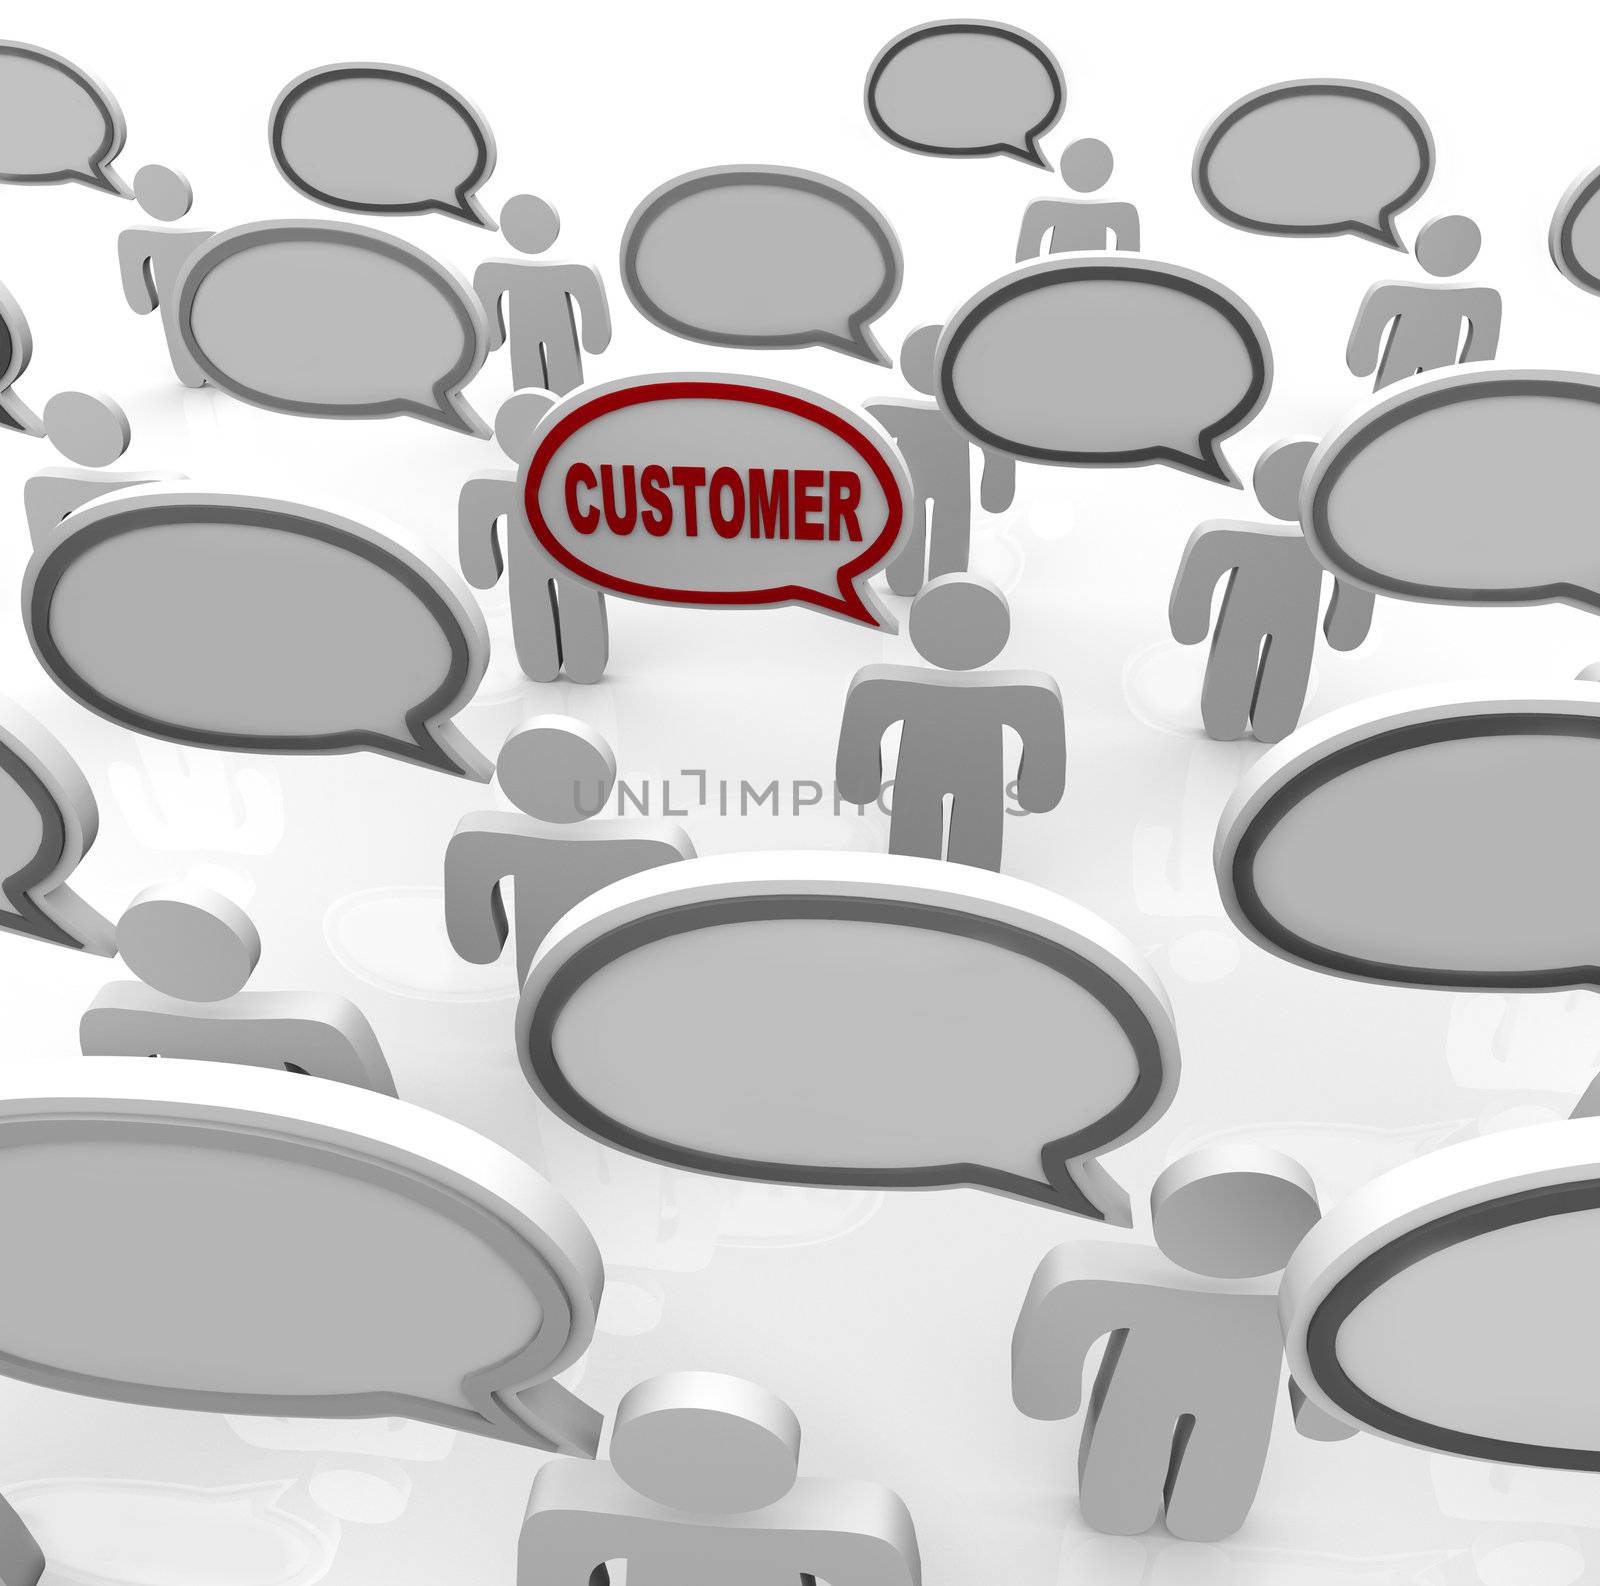 Many people speak with speech bubbles that are blank and one with the word Customer in it, representing the ability to focus on the needs of a niche targeted consumer in a crowded marketplace